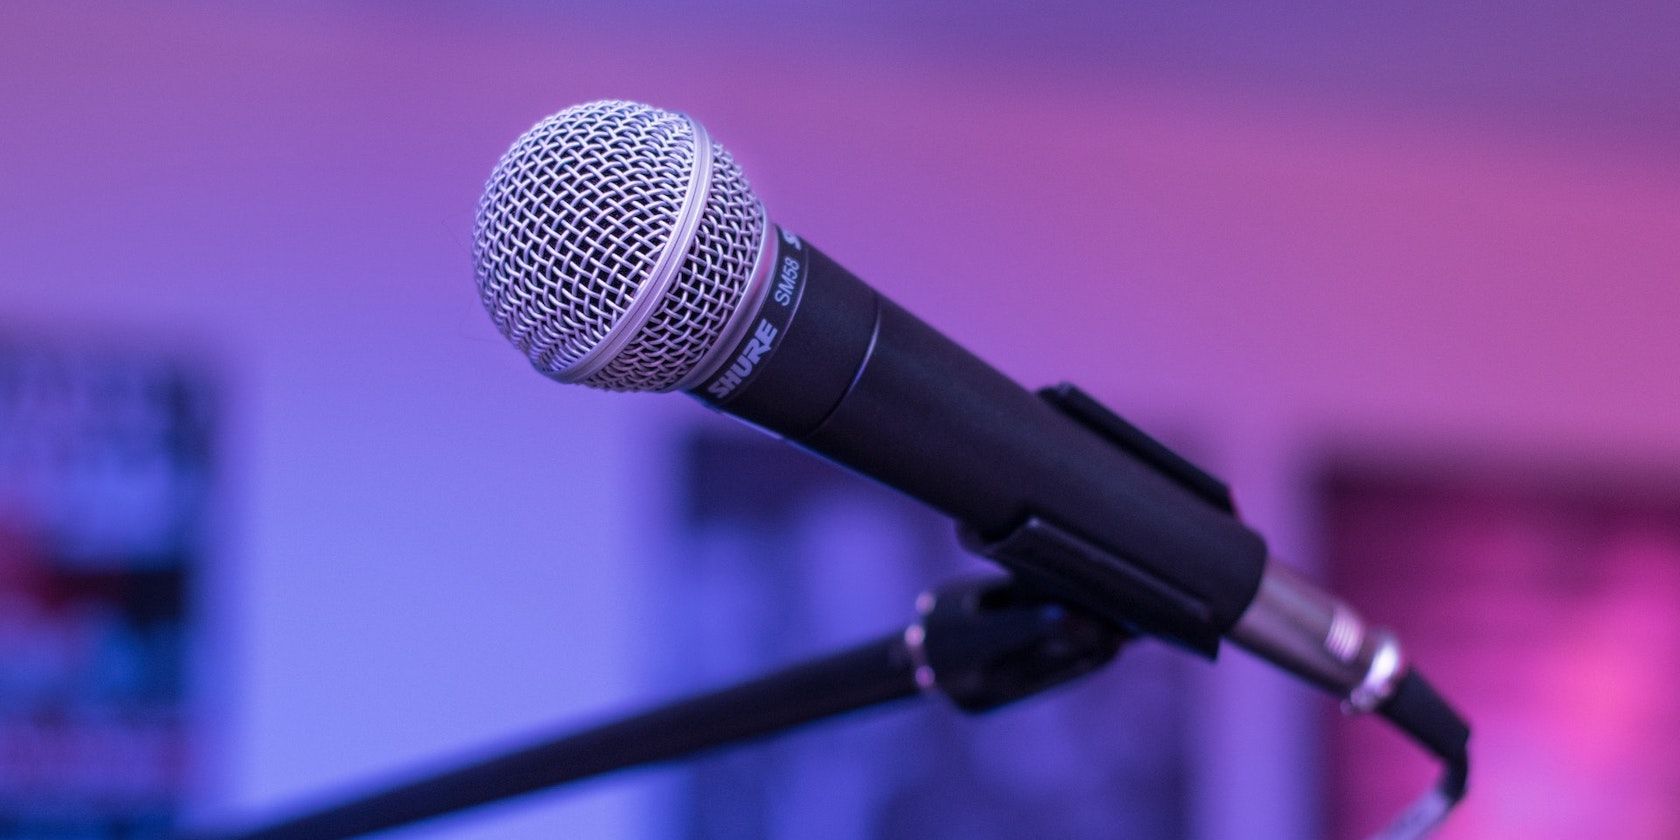 A close up photo of a SM58 vocal microphone against a purple and blue background